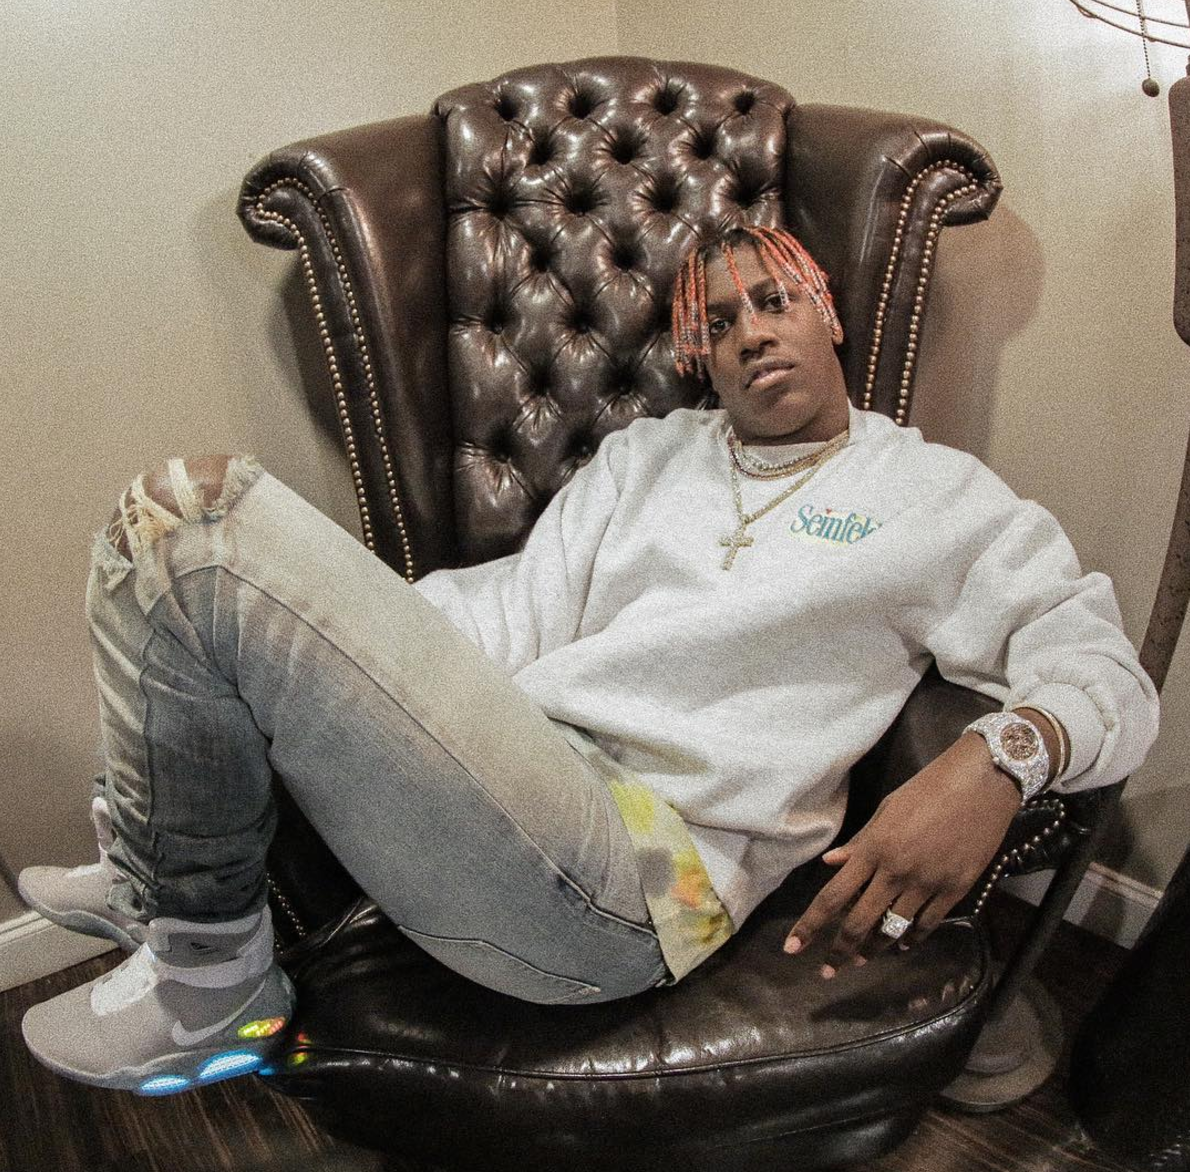 SPOTTED: Lil Yachty In 2016 Nike Mags